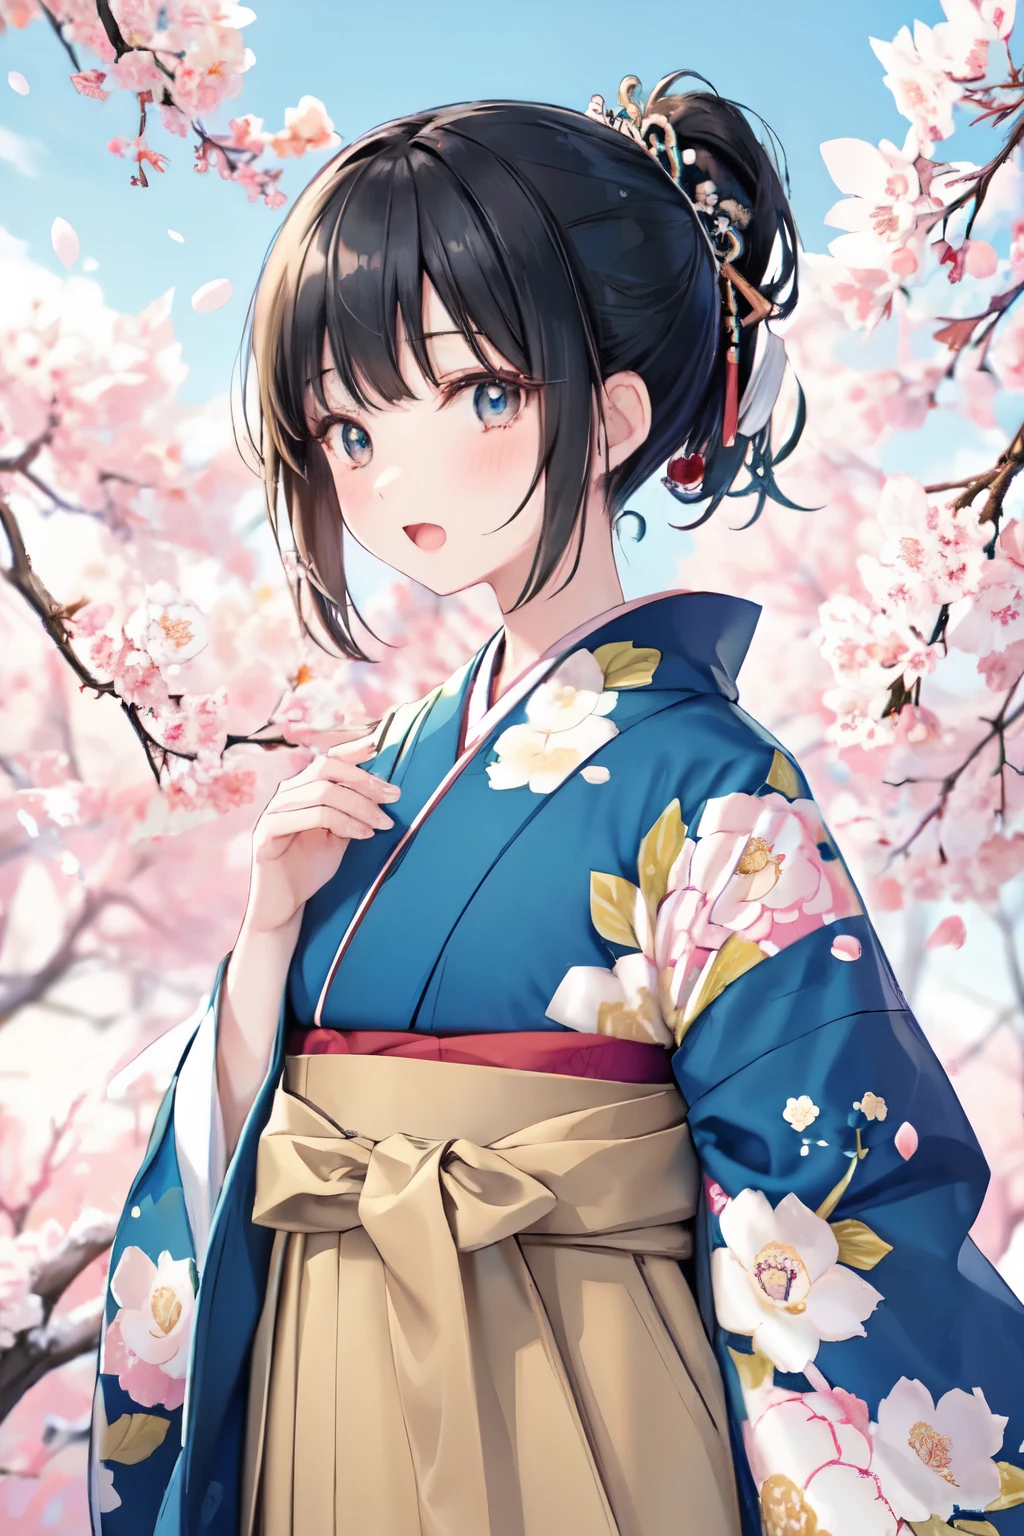 (best quality:1.2), masterpiece,anime,kawaii,One 20-year-old woman,cute,ultra-detailed face,detailed eyes,detailed nose,blush,open mouth,long eyelashes,happy,black hair,blunt bangs,chignon,dark blue stardust pattern kimono,beige hakama,standing facing the front,looking at viewer,Cherry tree,Cherry blossom snowstorm in the scenery,modern japan,graduation ceremony,University,blue sky,Rim Light,(School building in the distance)